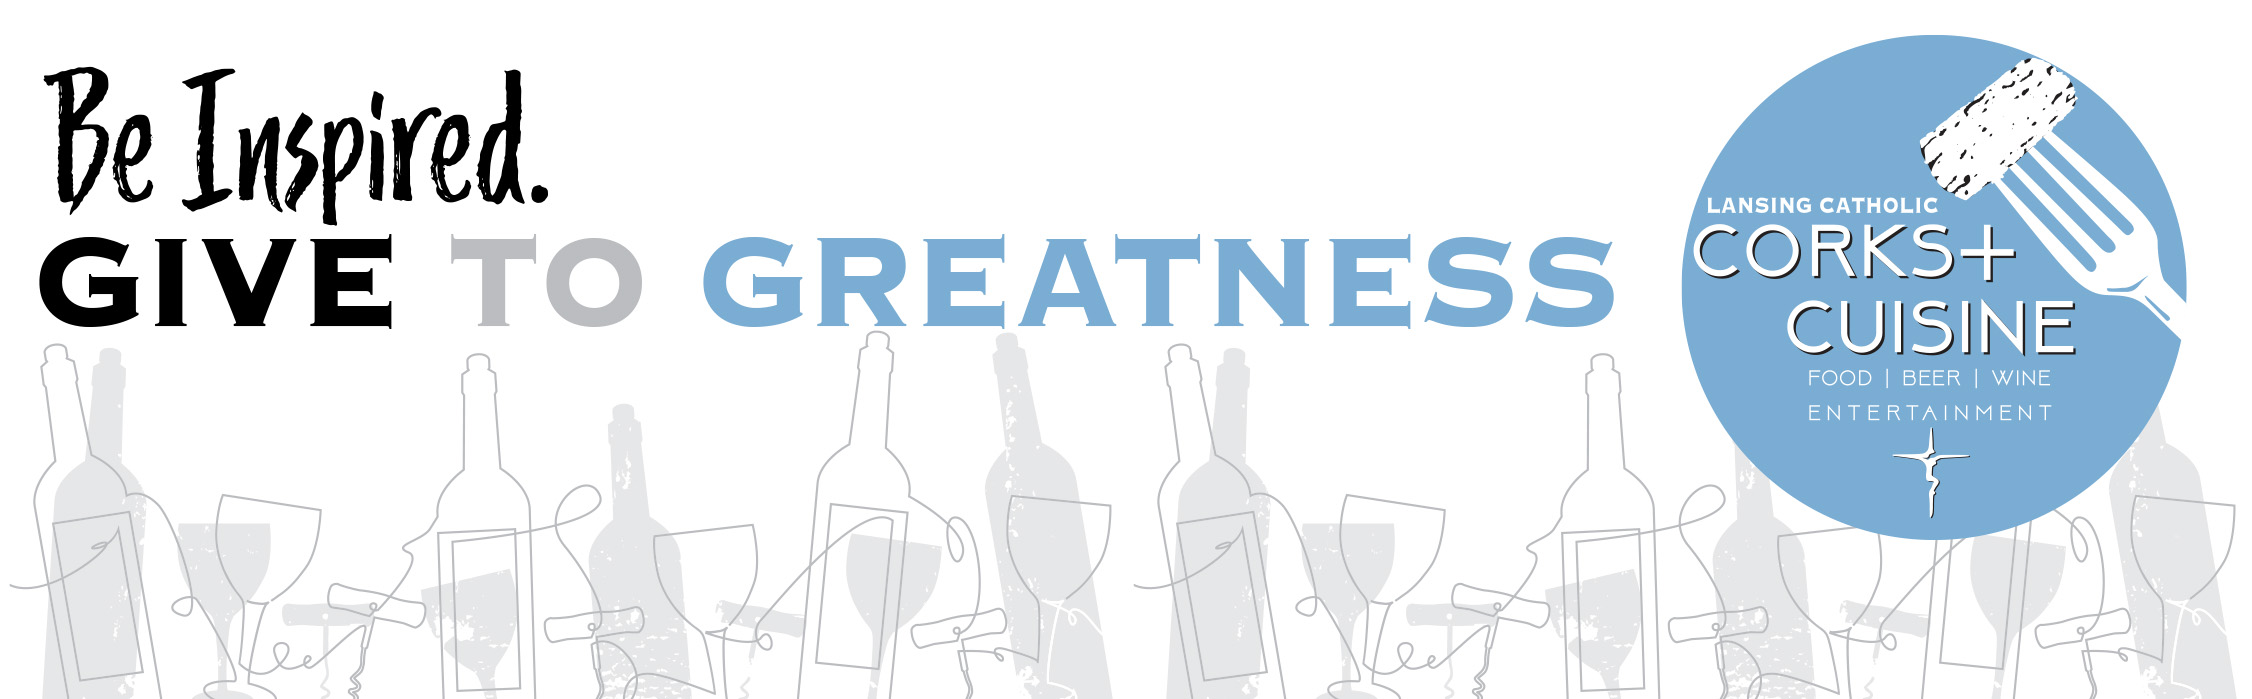 Be Inspired. Give to Greatness at Lansing Catholic Corks + Cuisine